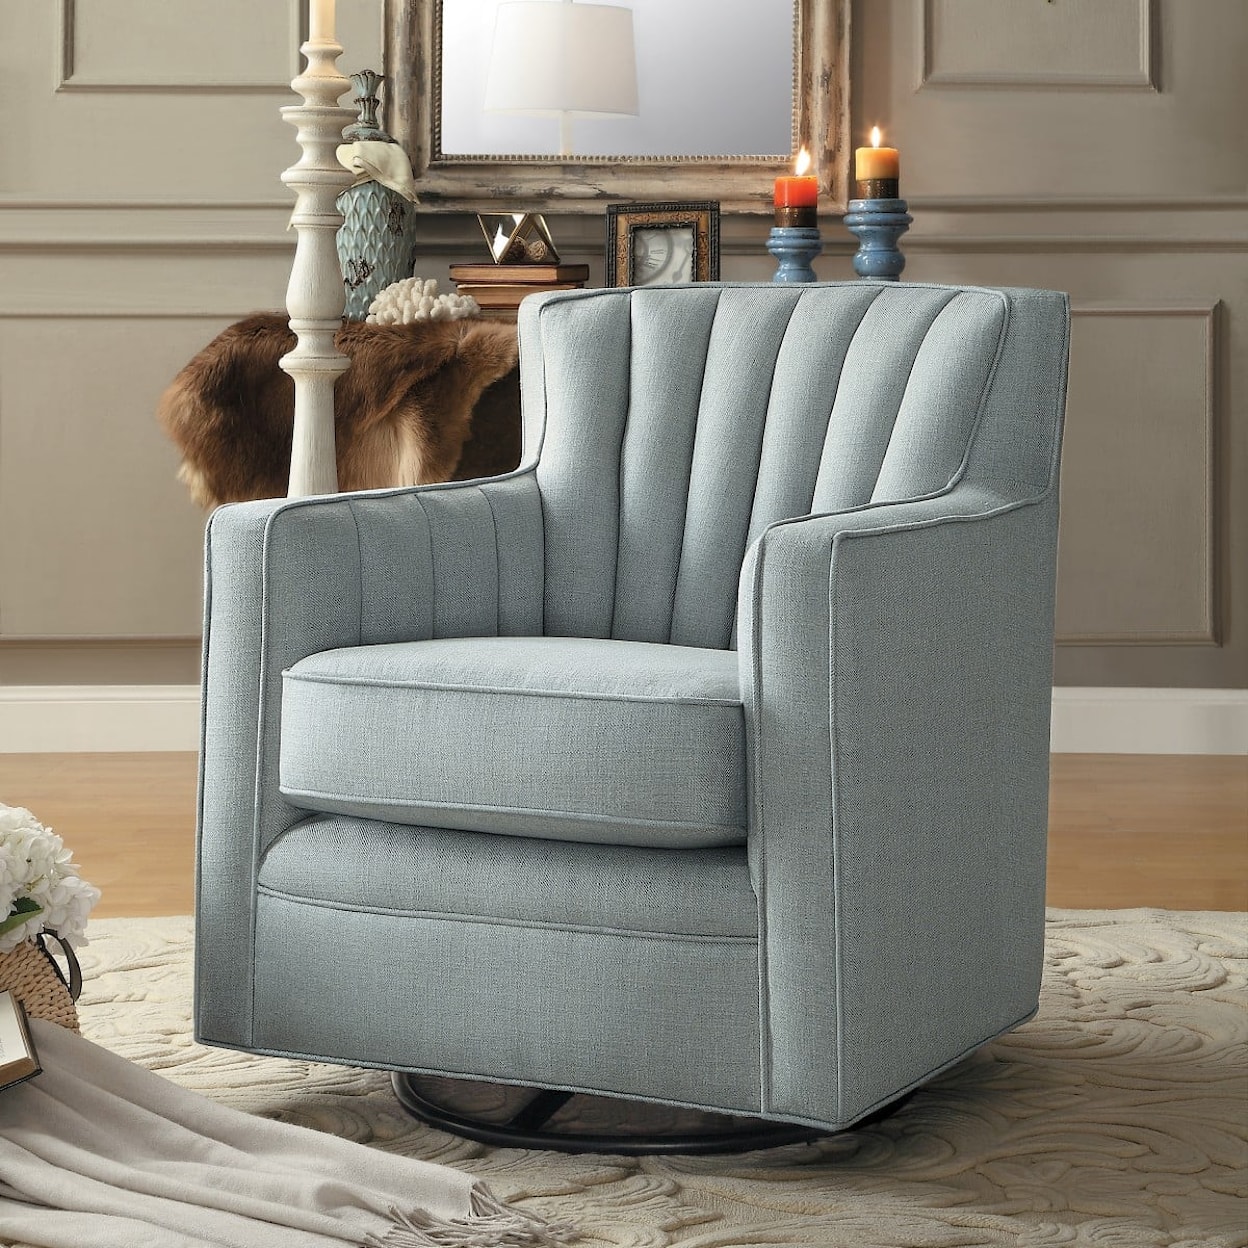 Homelegance  ACCENT CHAIR, STRIPE TEXTURED FABRIC